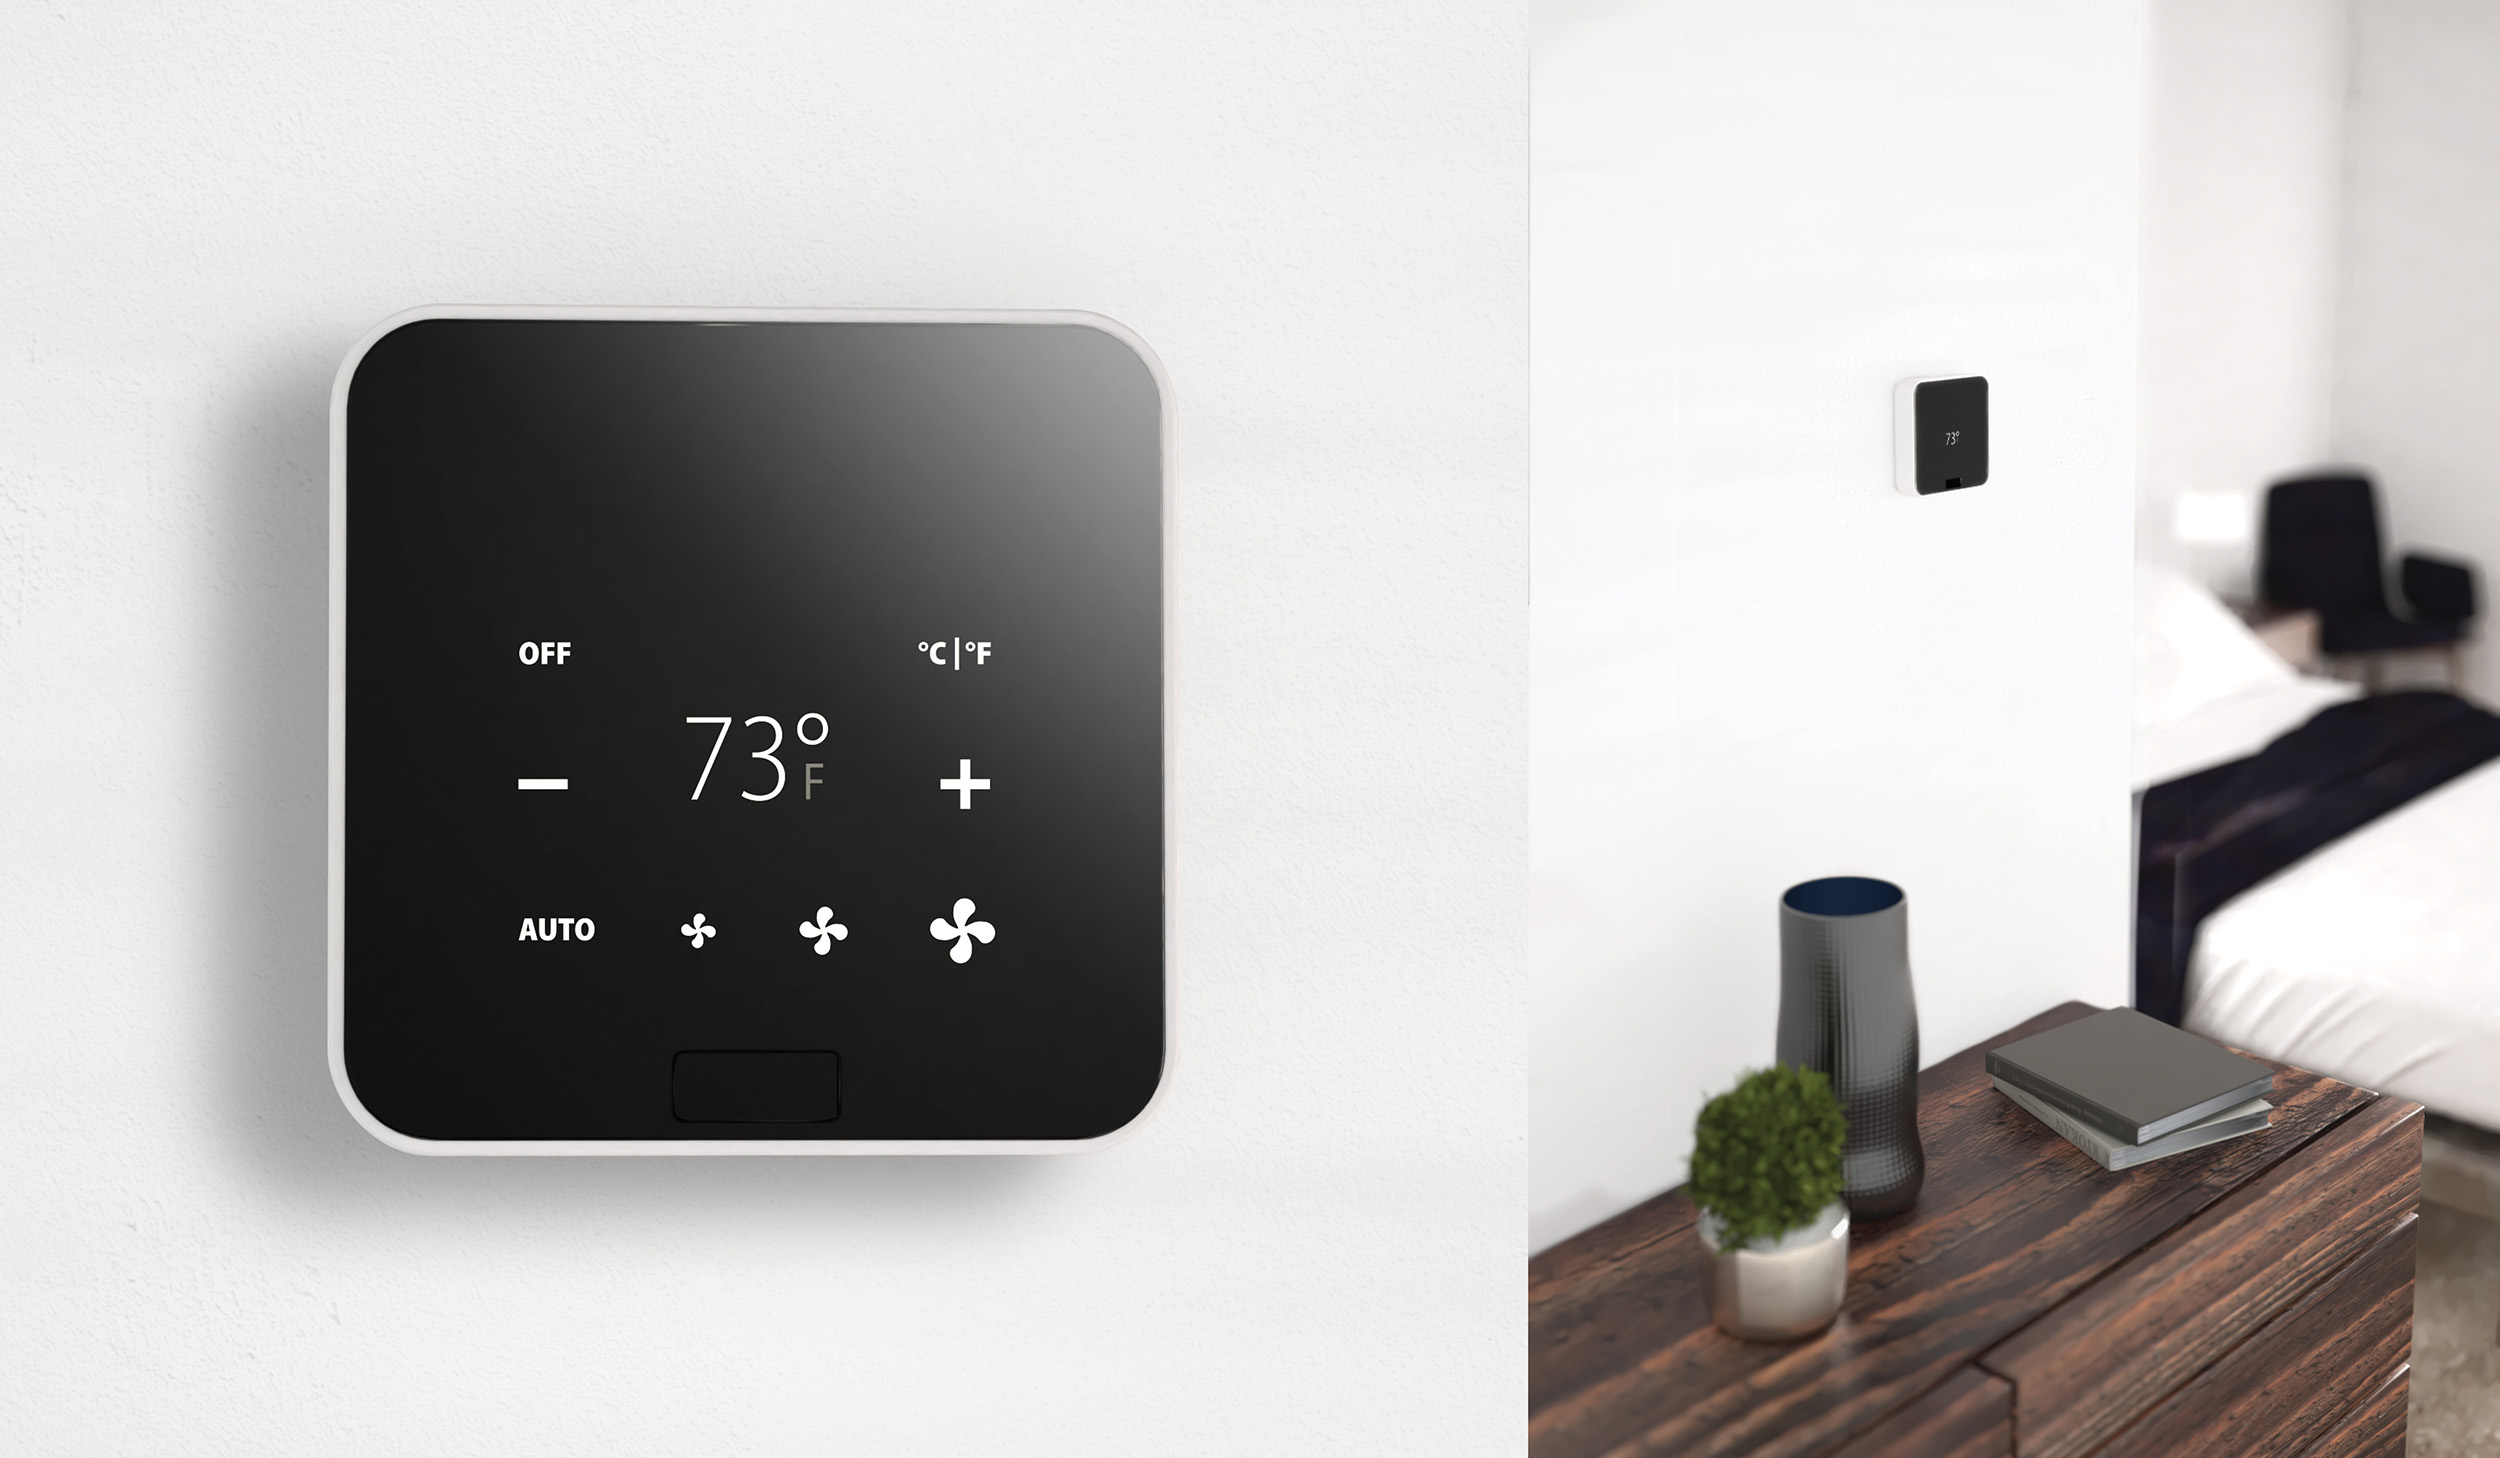 6 Tangible Benefits of Eco-Smart Thermostats for Hotels 